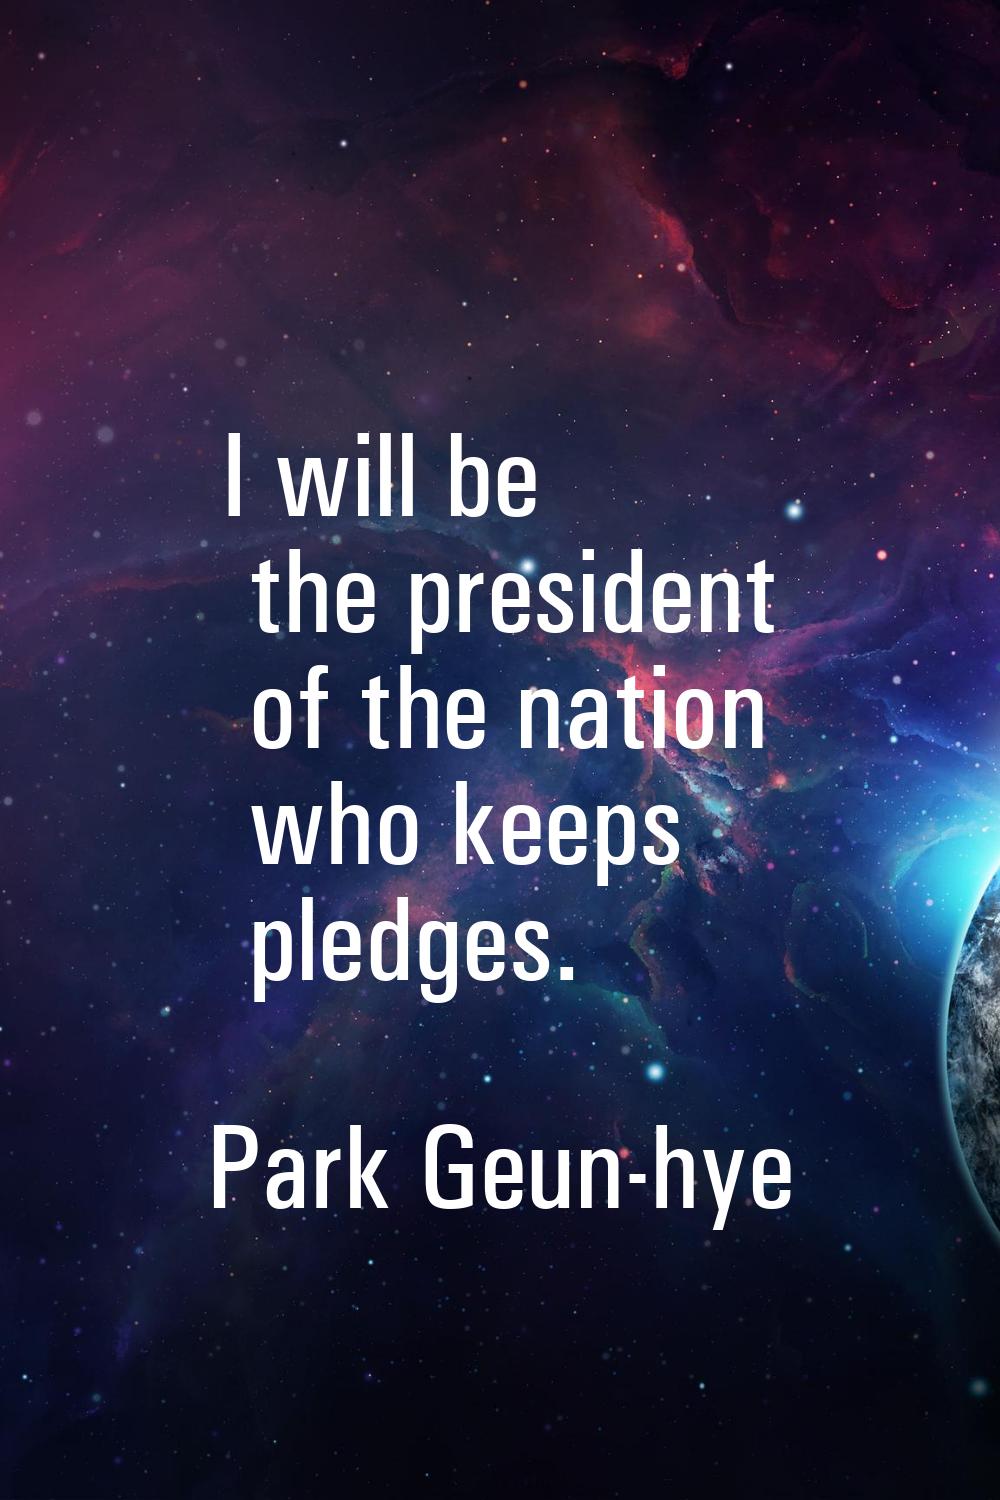 I will be the president of the nation who keeps pledges.